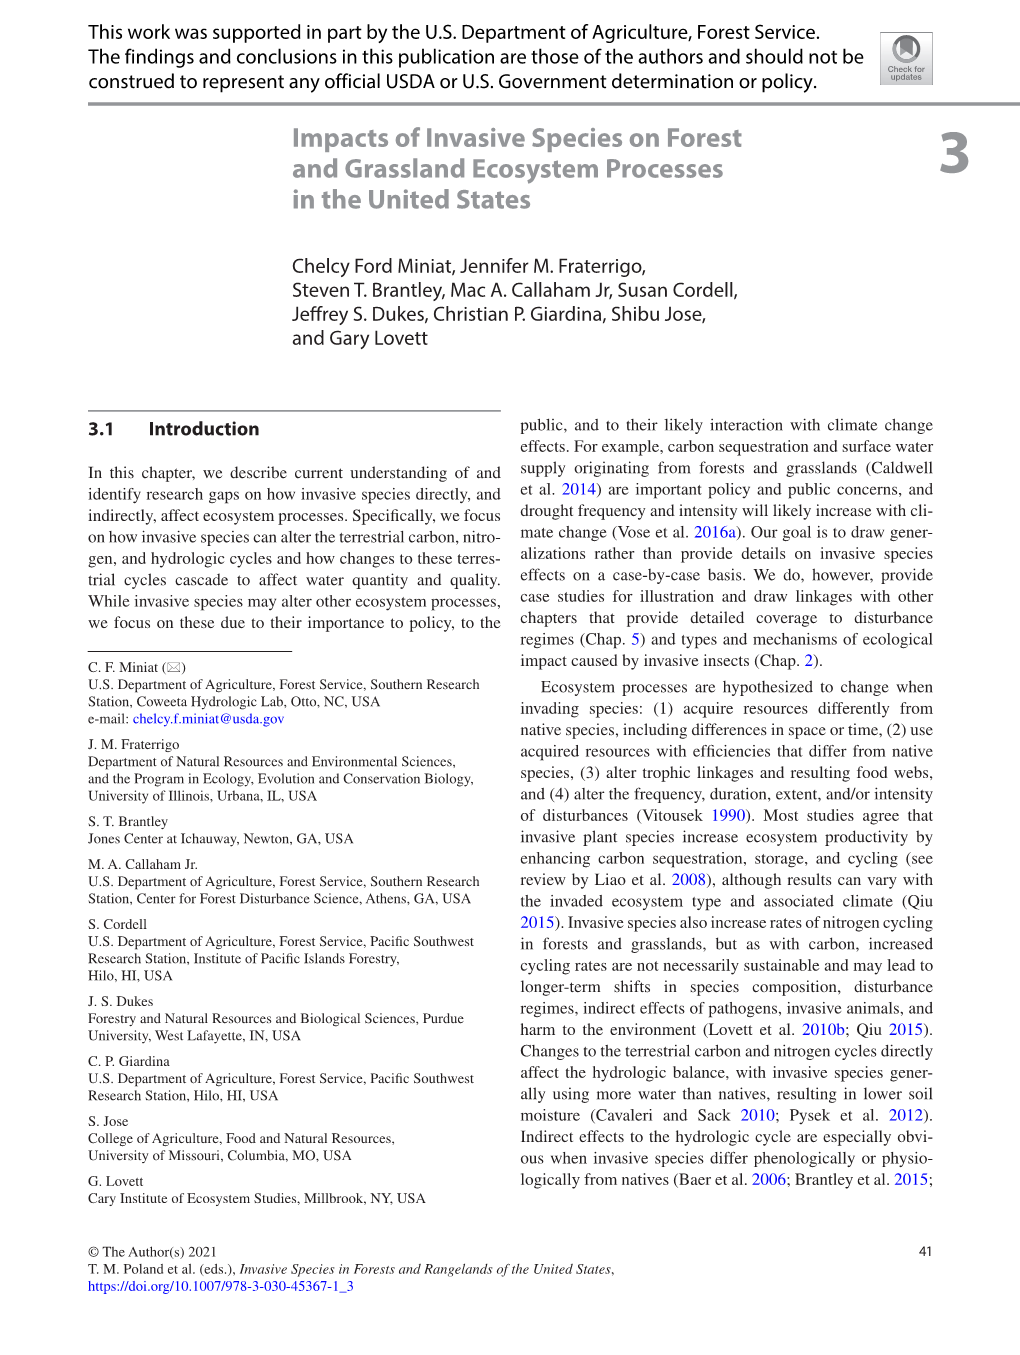 Impacts of Invasive Species on Forest and Grassland Ecosystem Processes 3 in the United States